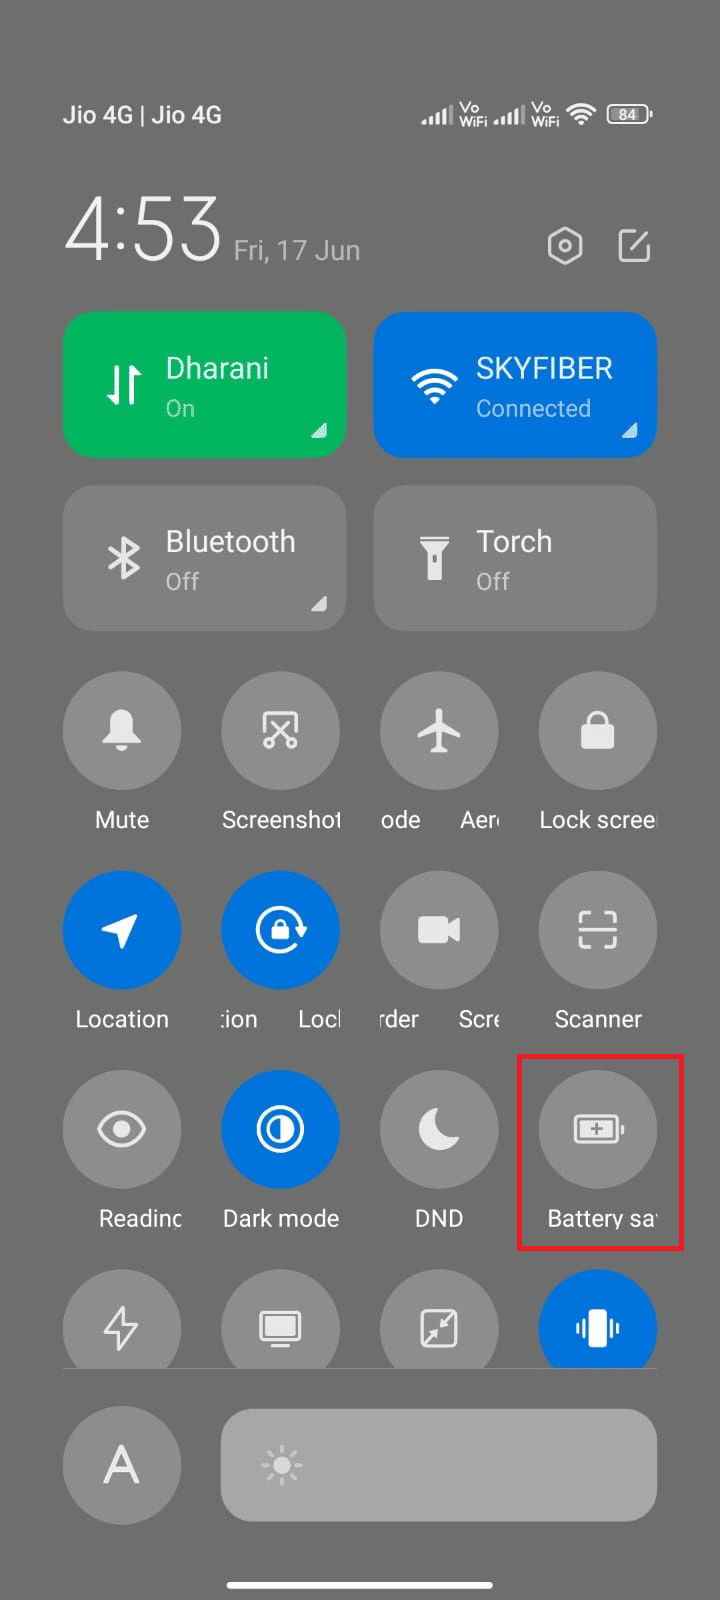 check if the Battery saver setting is turned off